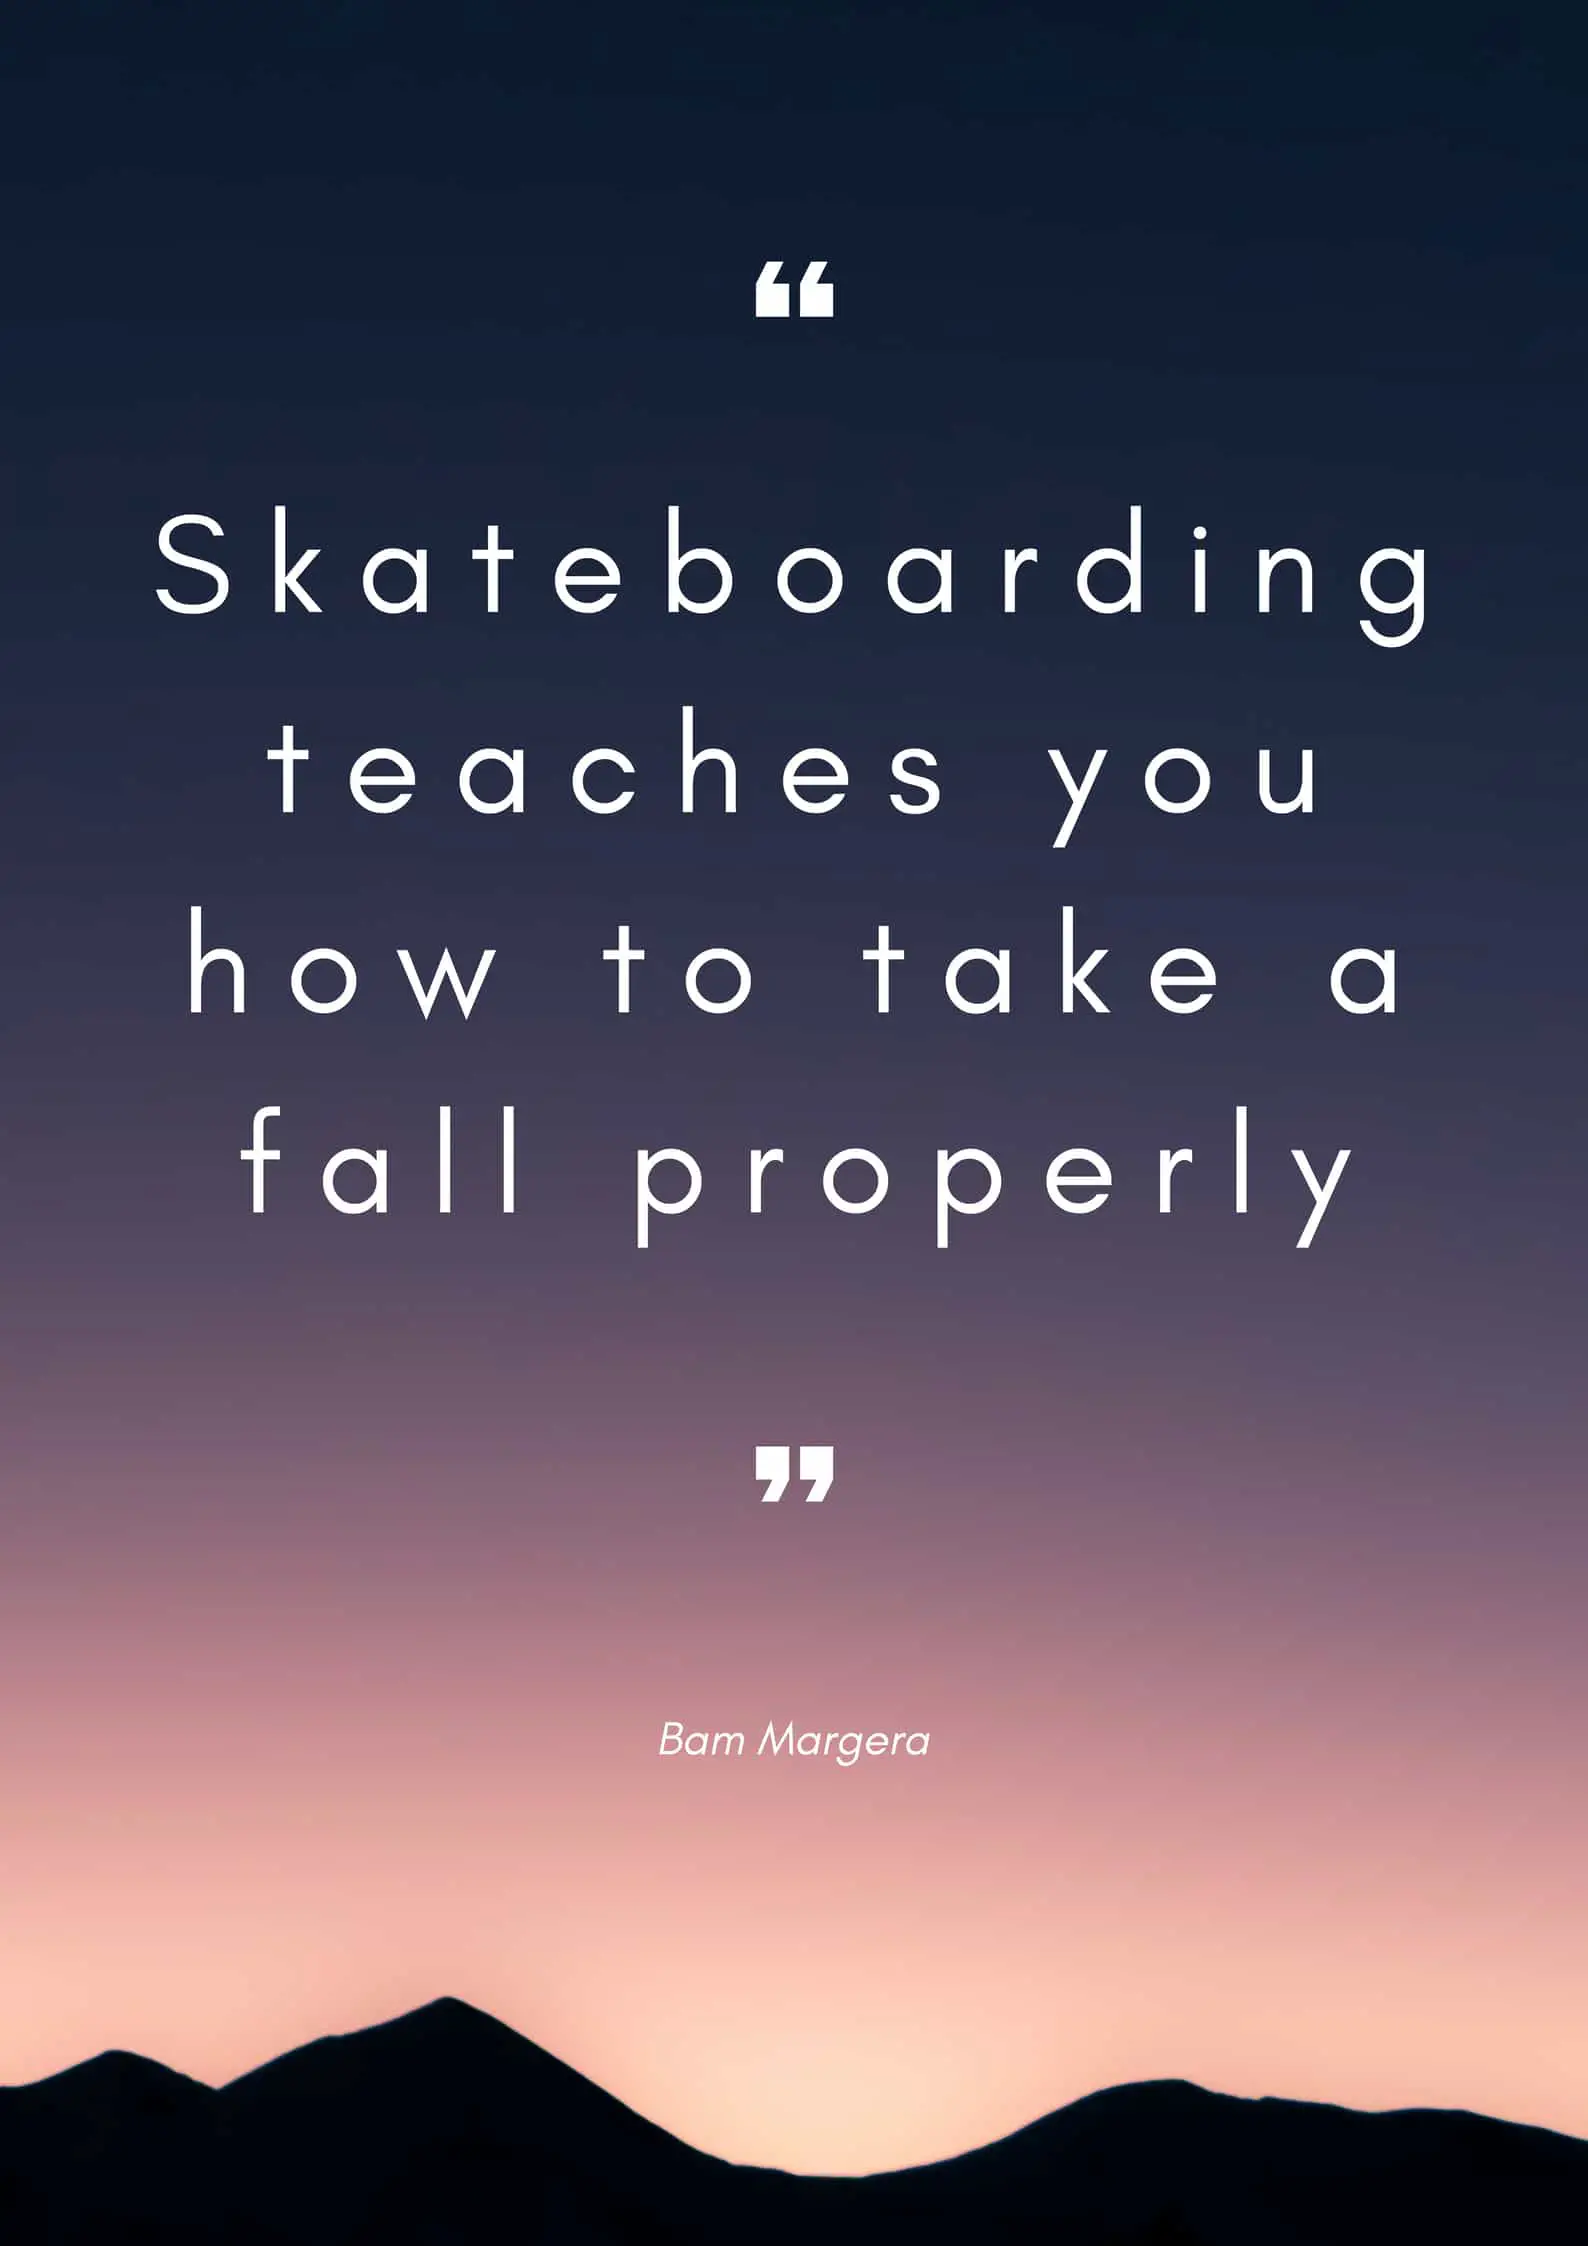 Skateboarding teaches you how to take a fall properly. Margera